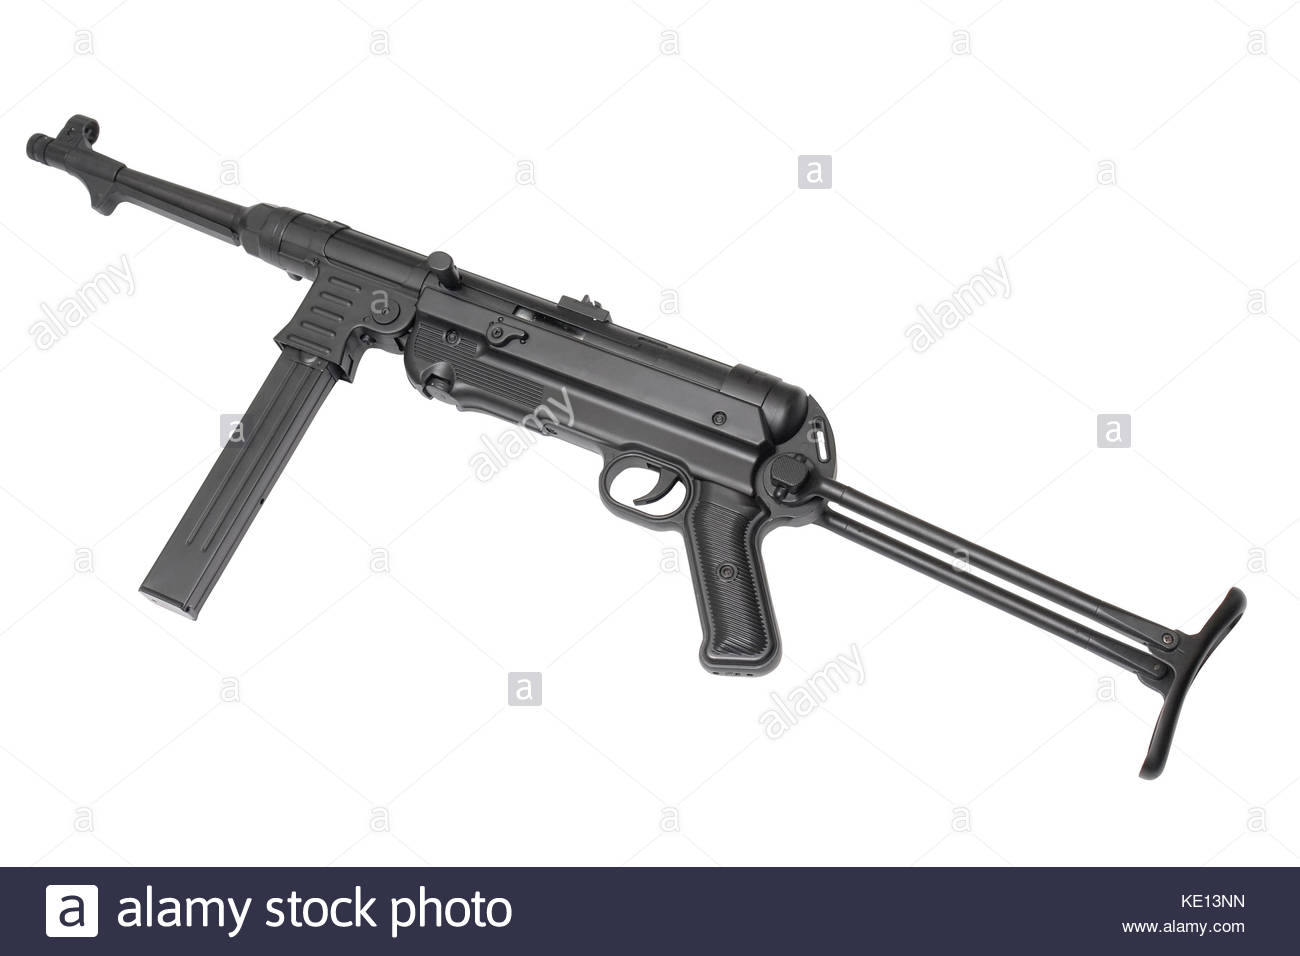 German At Wwii Mp40 Submachine Gun Usually Used By Wehrmacht